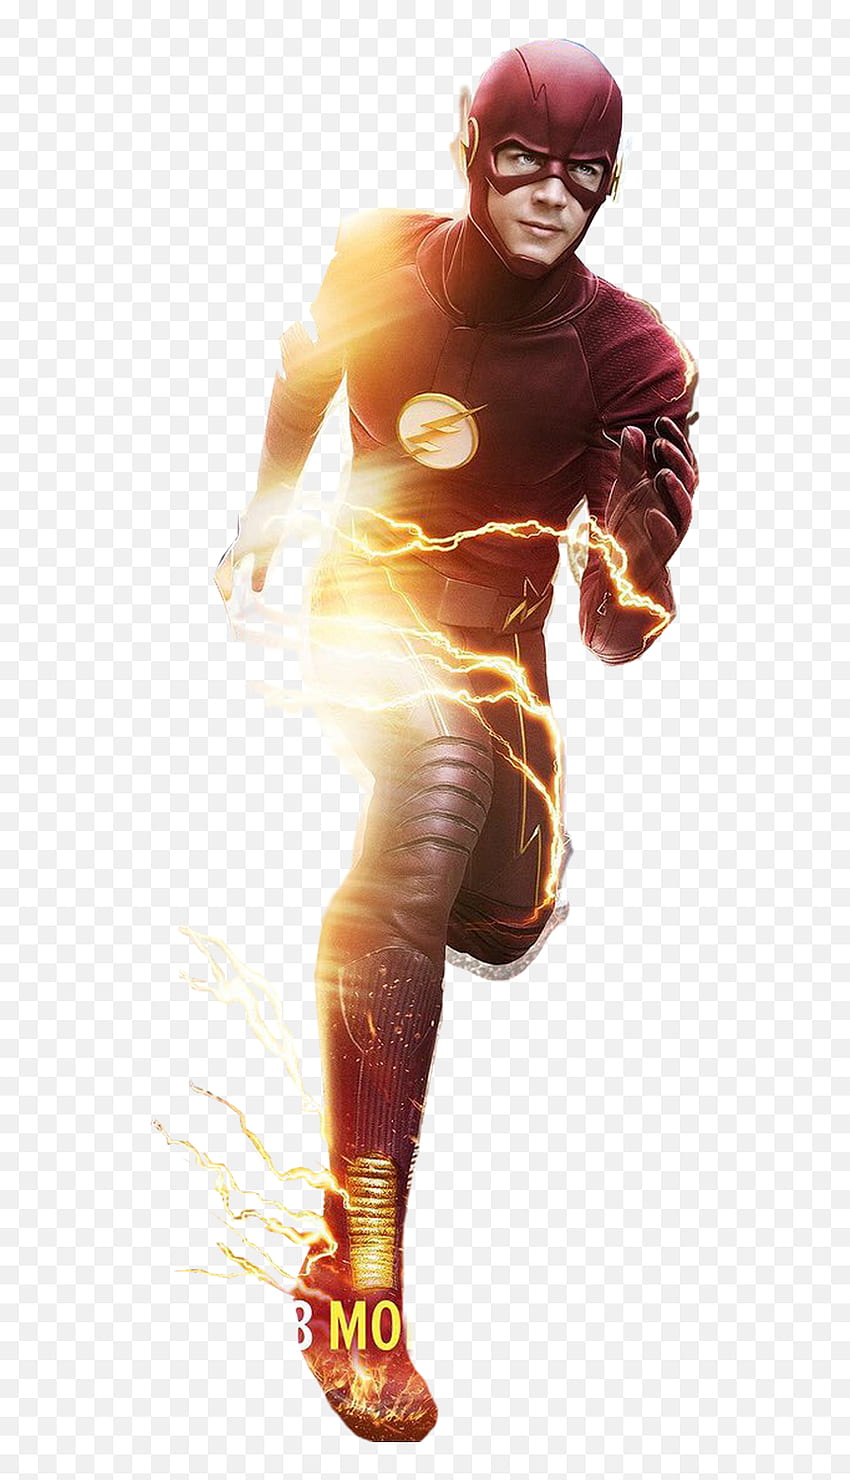 Best Flashlight Transparent - Supergirl And The Flash Png, The Flash Logo - transparent png HD電話の壁紙